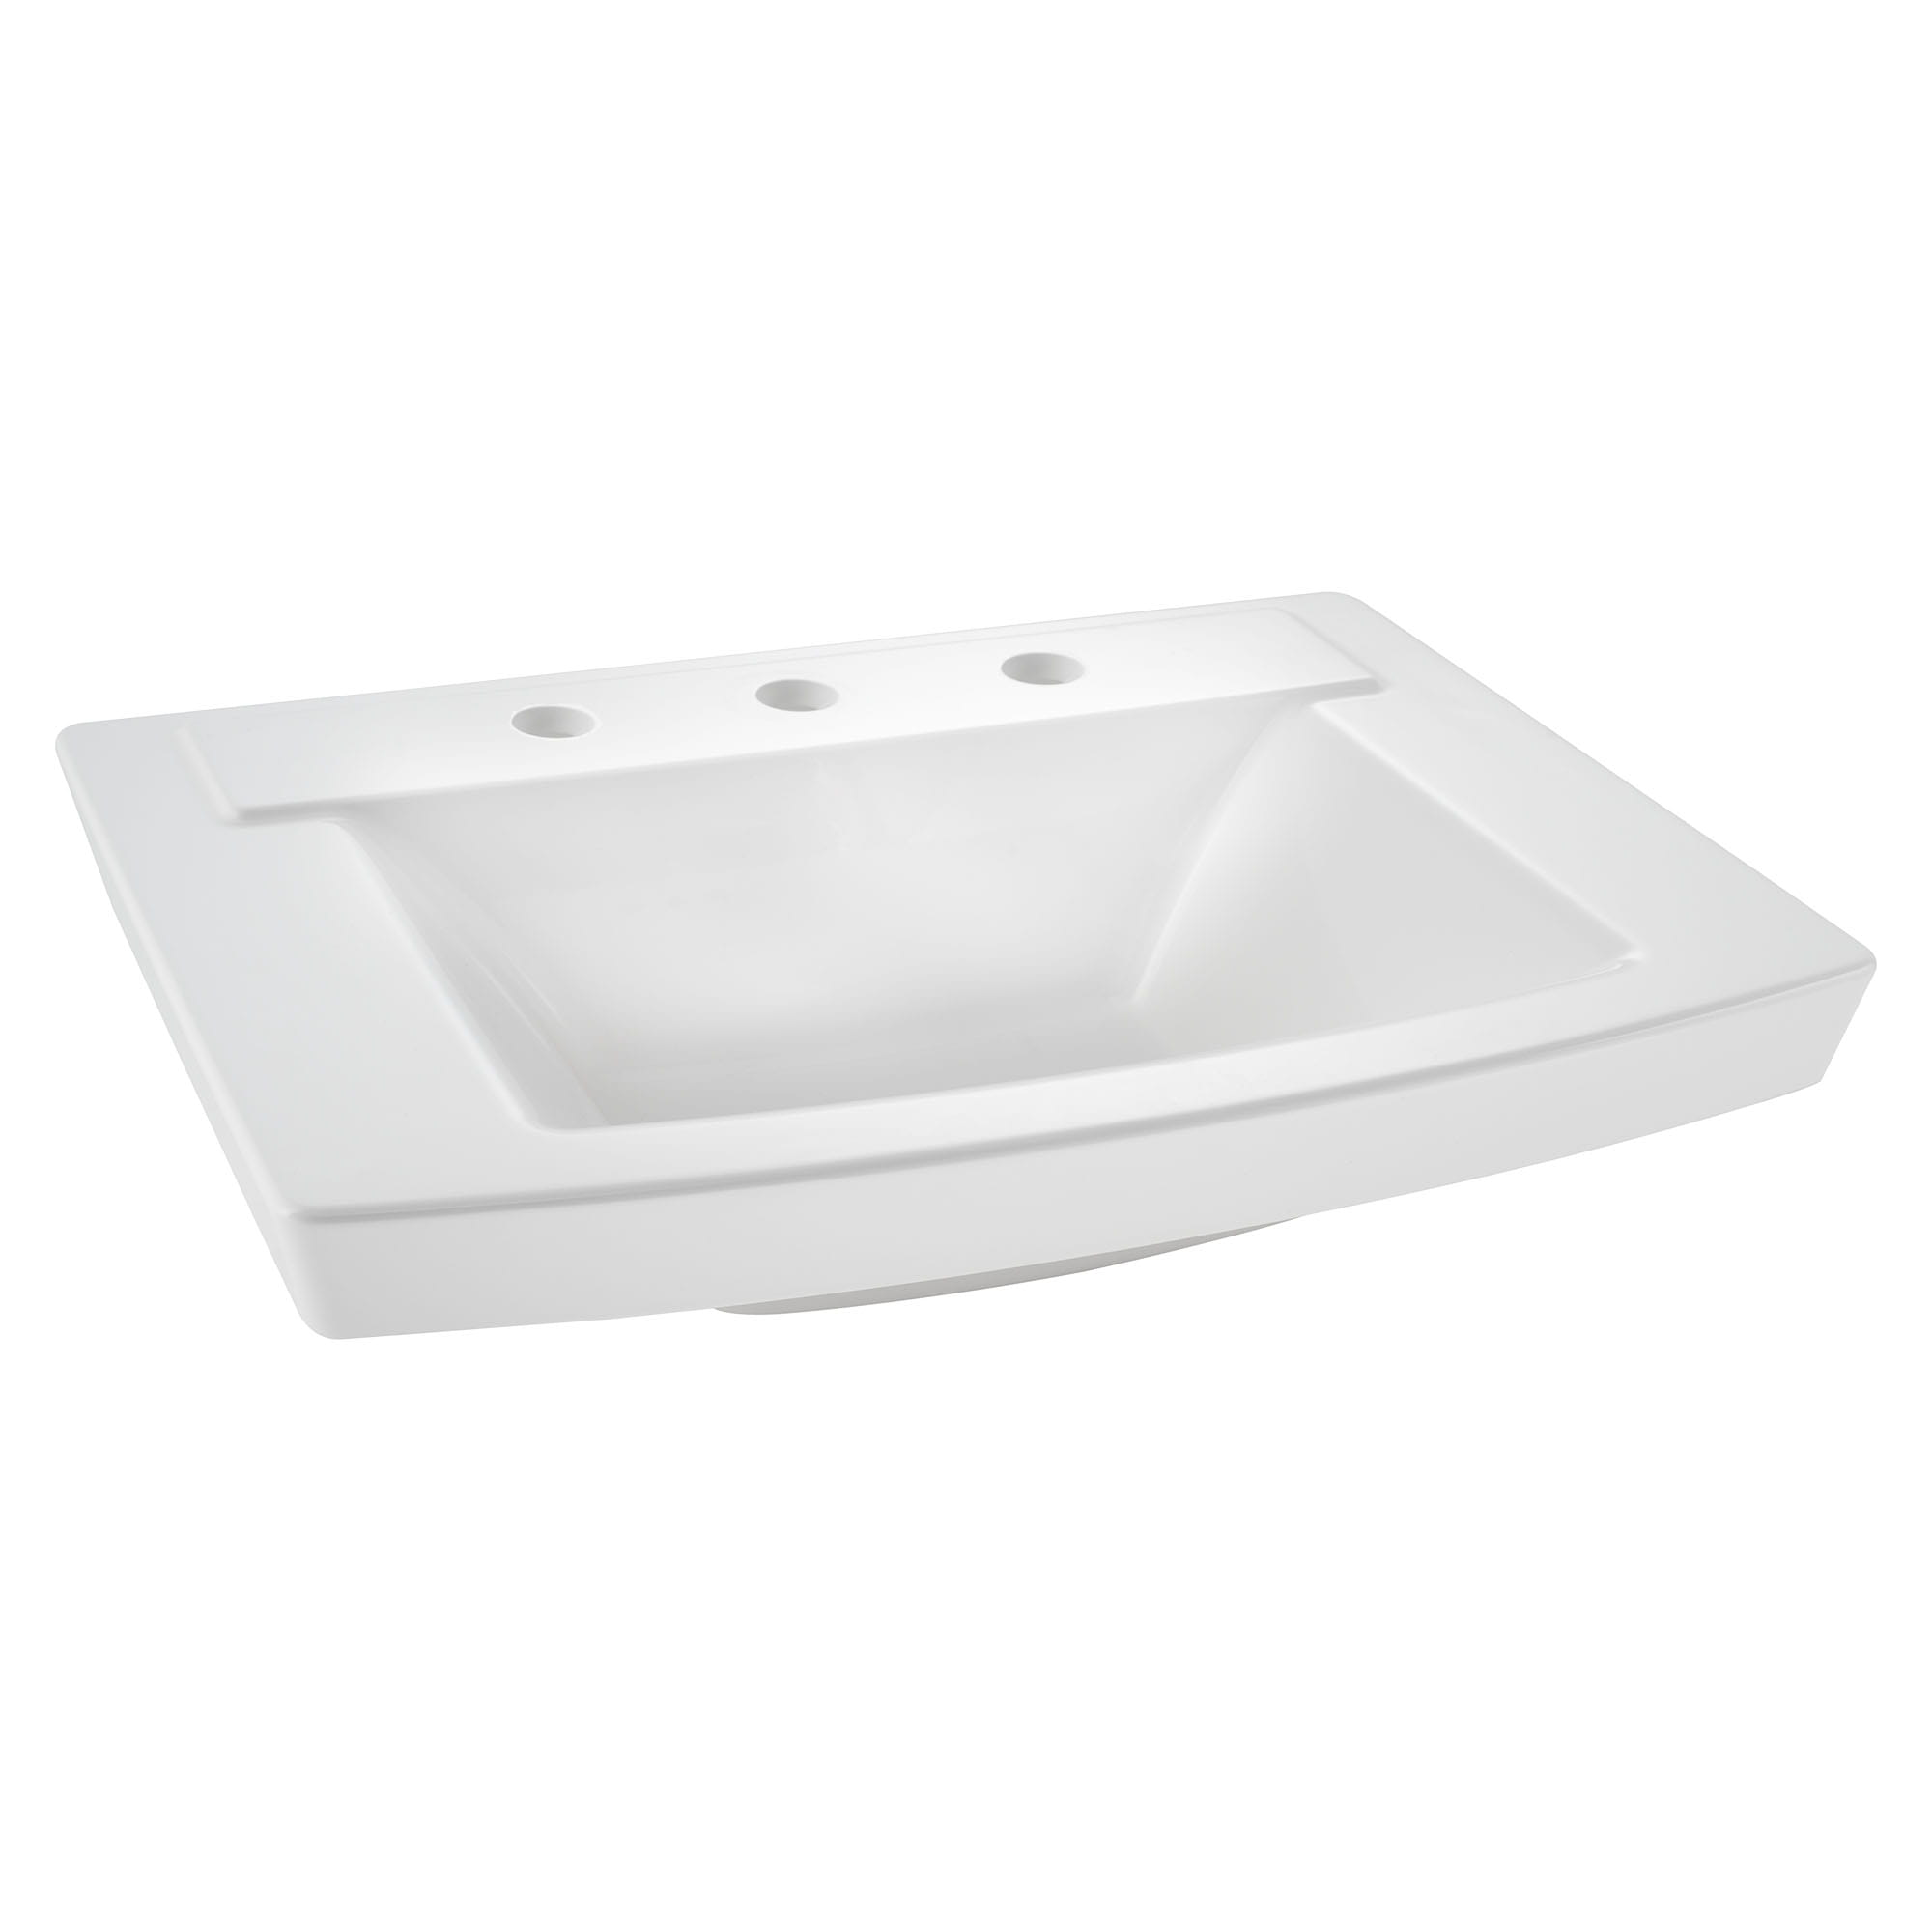 Townsend™ 24 x 18-Inch Above Counter Sink With 8-Inch Widespread